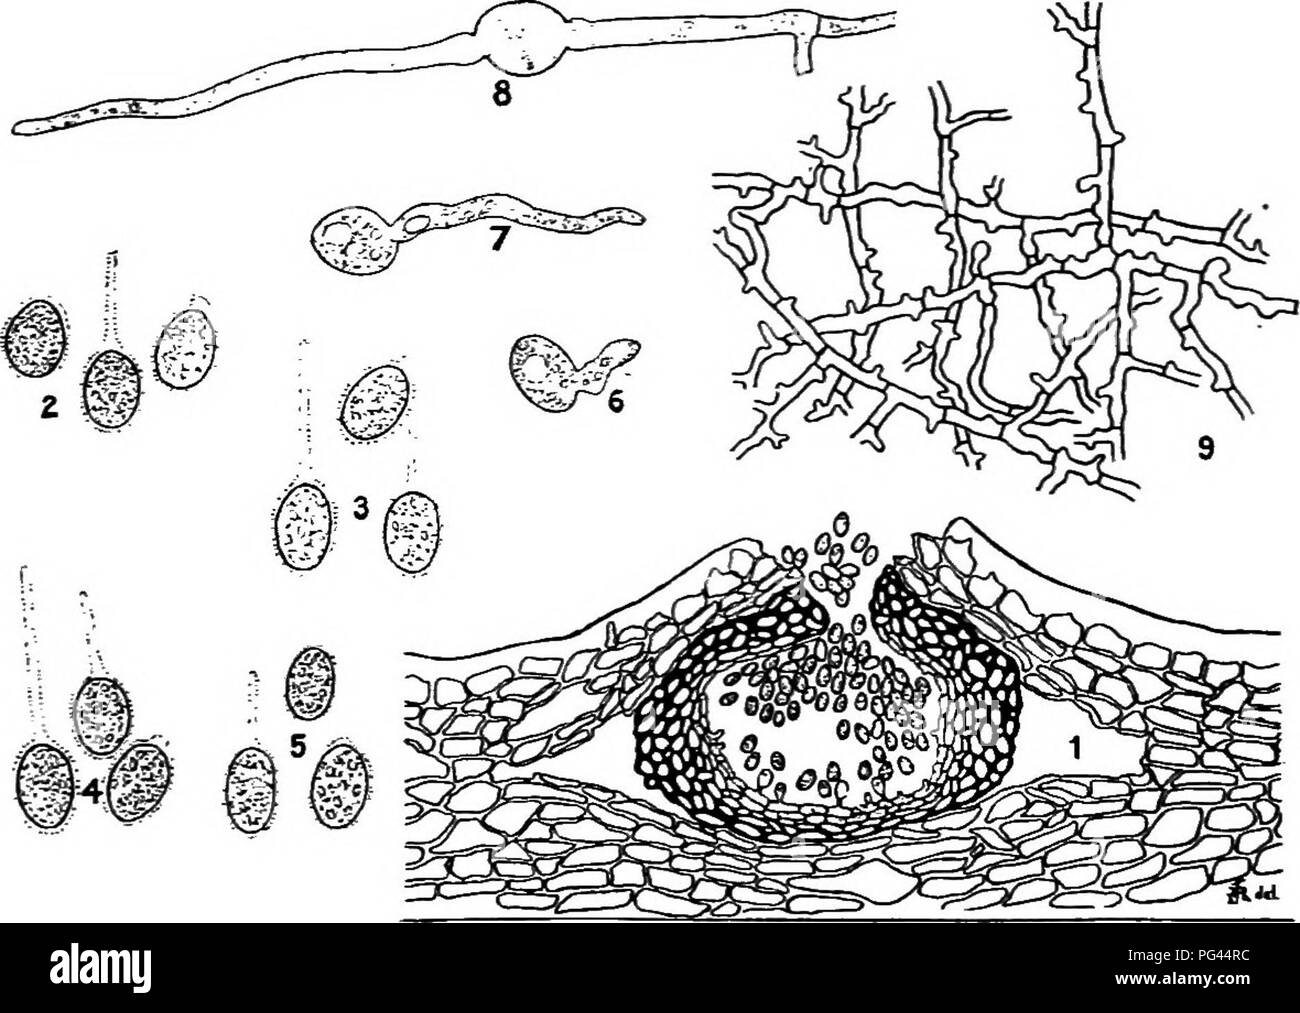 . A text-book of mycology and plant pathology . Plant diseases; Fungi in agriculture; Plant diseases; Fungi. 262 MYCOLOGY spores in Phoma are colorless and unicellular. The pycnidia are black with a terminal pore and depressed in the tissues of the host. The genus is arbitrarily limited to those species in which the spores are less than 15/4, for the larger spored forms have been placed in the genus Macrophoma. The most important species from the pathologic viewpoint are out of the iioo species recognized the^oUowing: Phoma beta is the cause of the heart rot and blight of beets. Phoma batata p Stock Photo